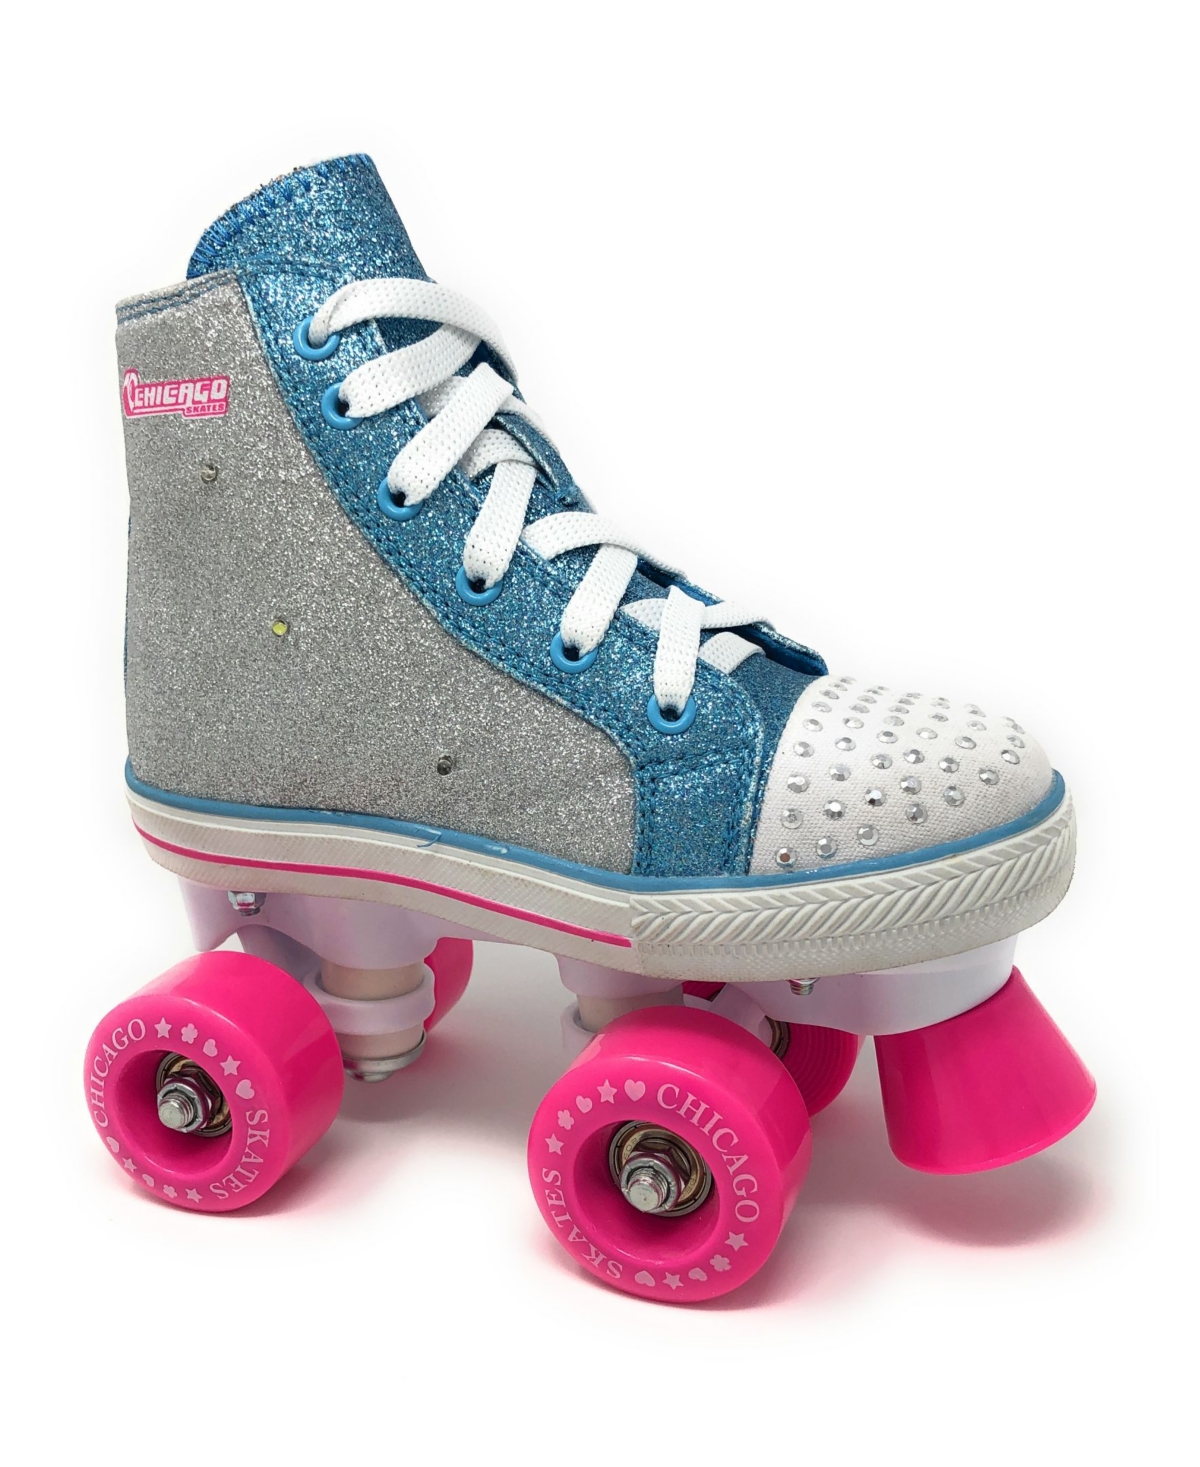 Fashion All-Star Quad Roller Skate - Size J12 - Miscellaneous